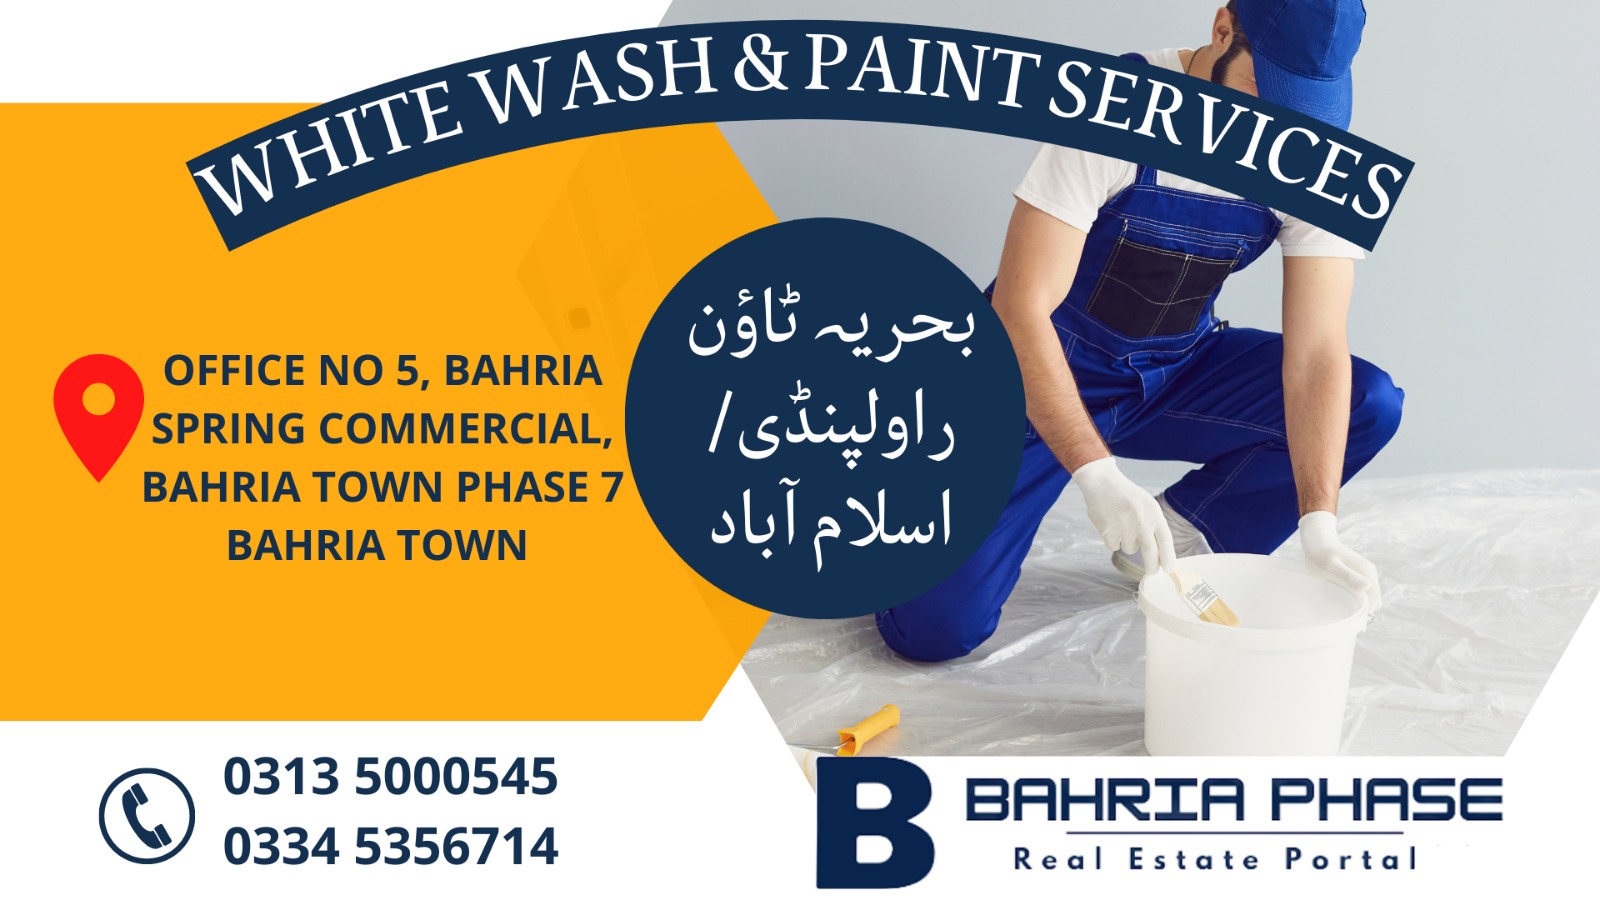 White wash & Paint services in Bahria Town Rawalpindi, Office No 5, Bahria Spring Commercial, Bahria Town,Punjab,Pakistan